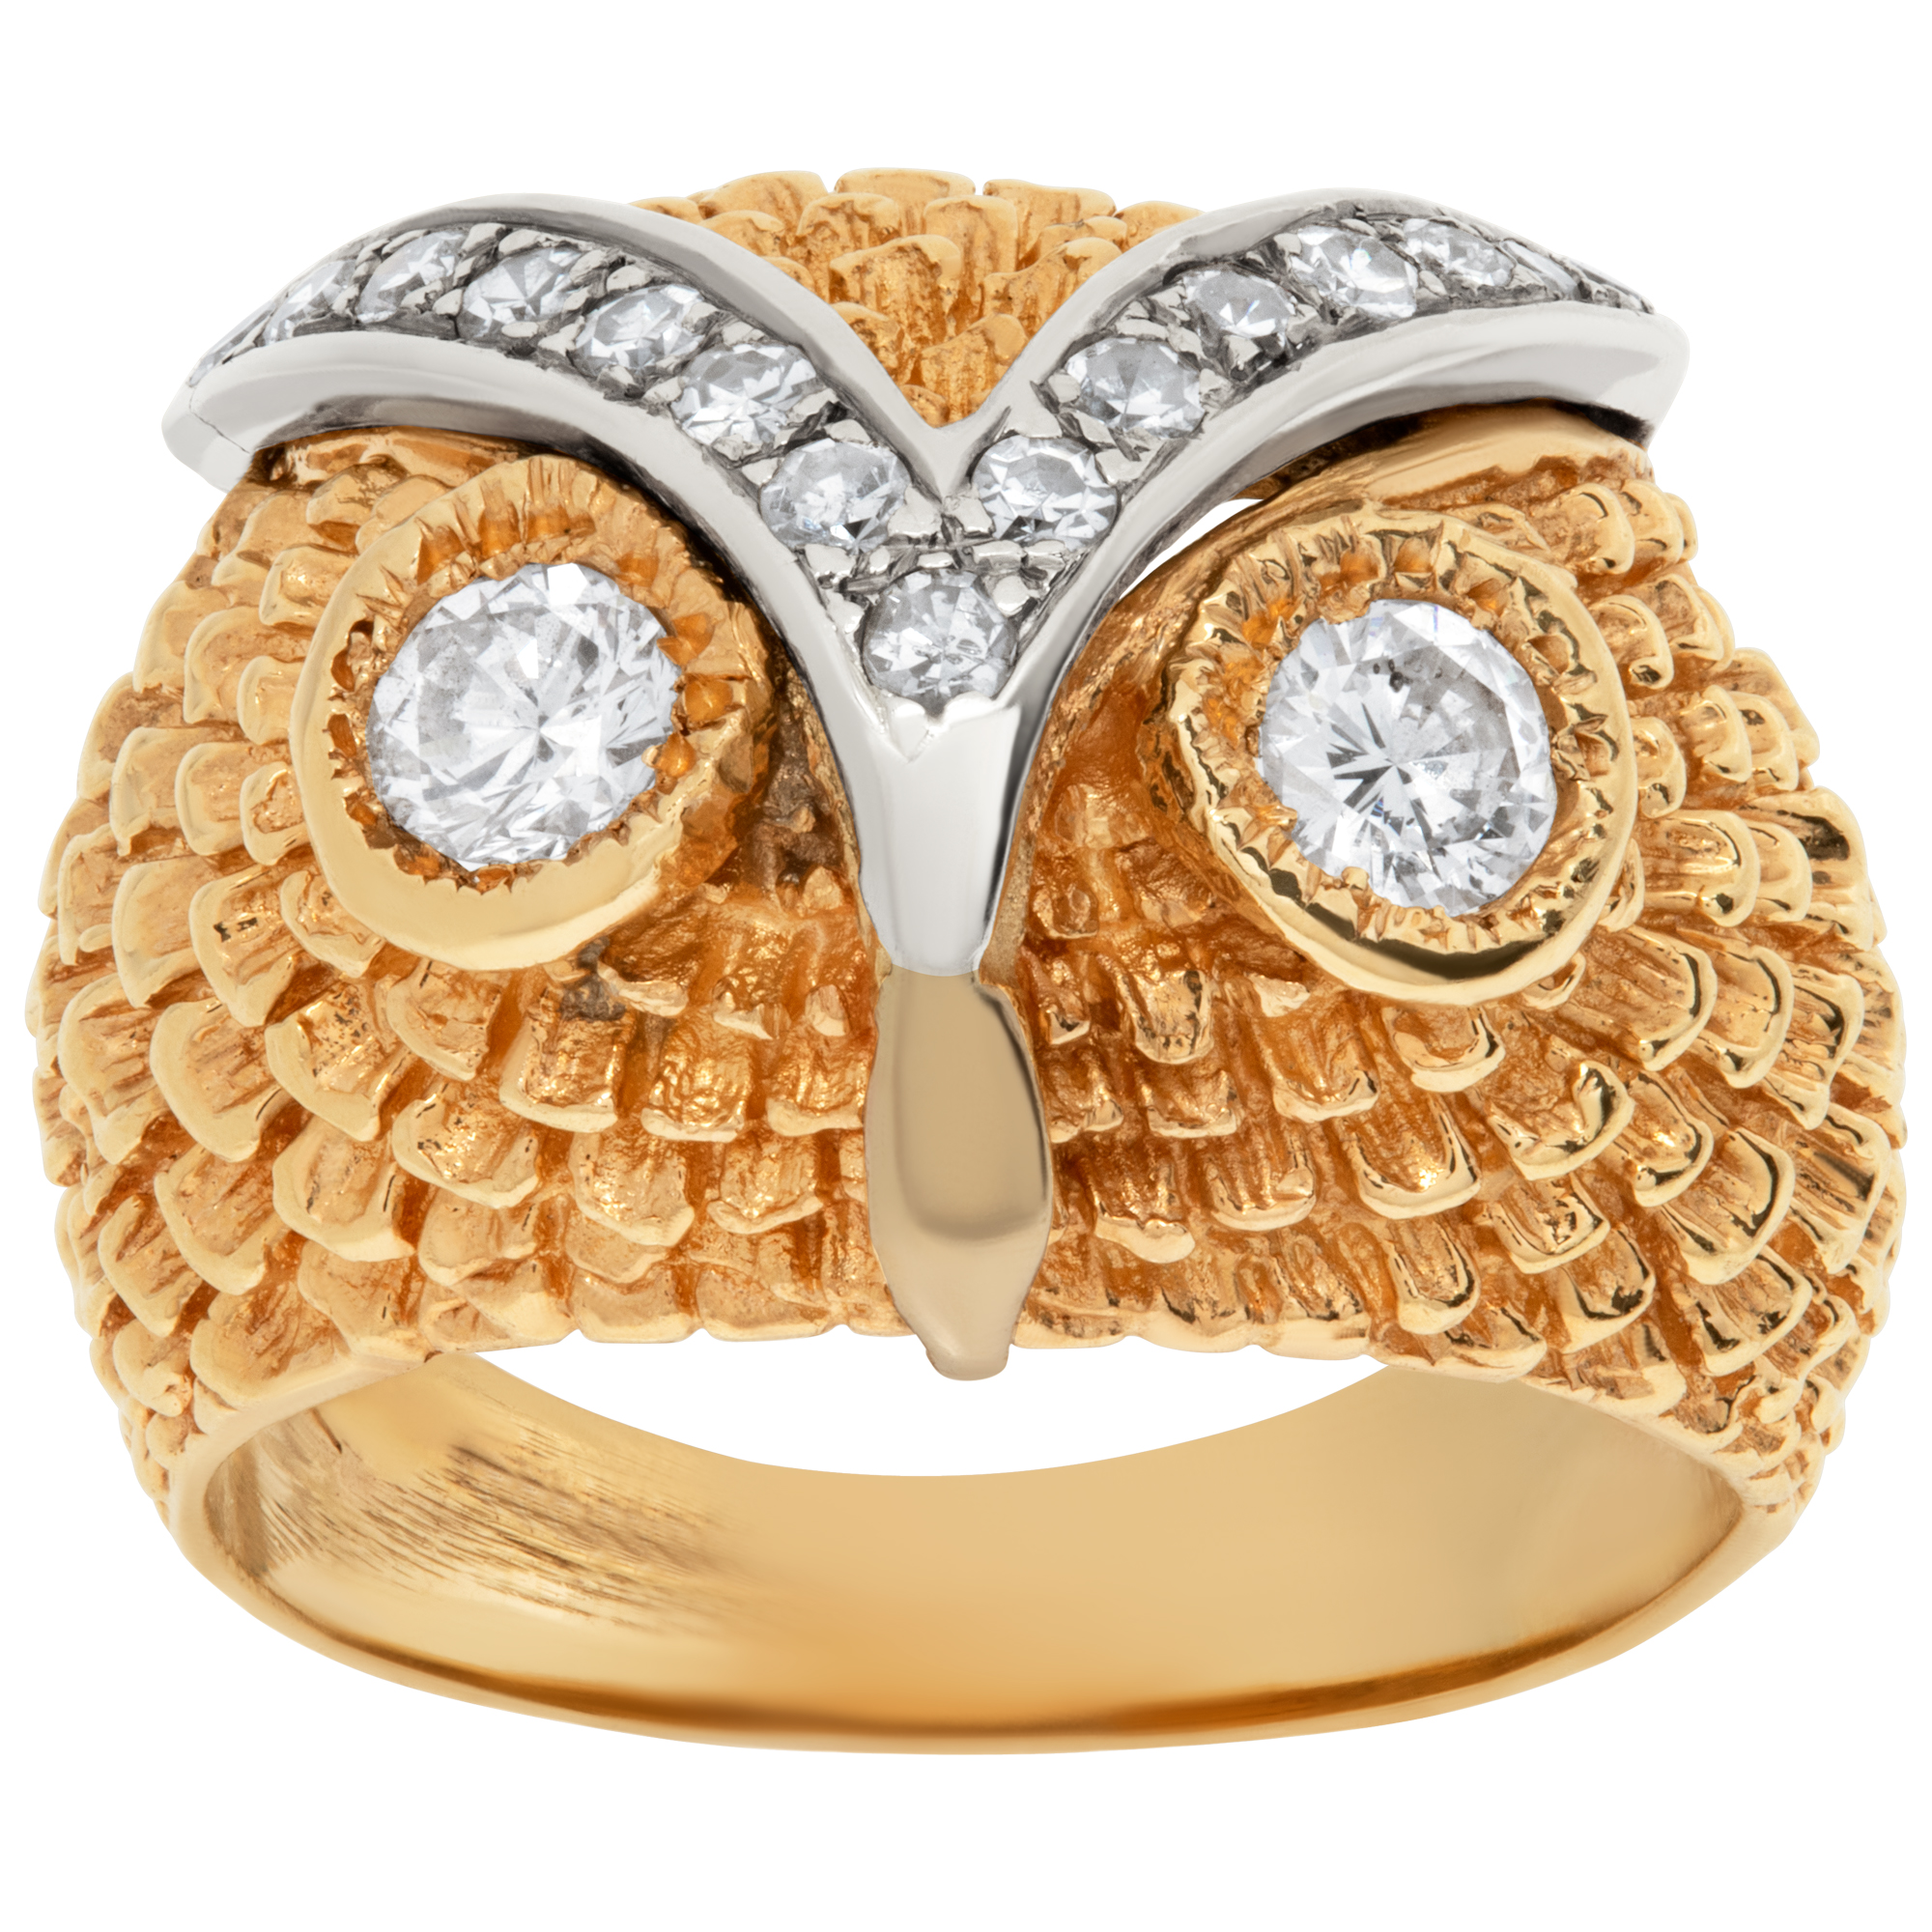 Owl face ring in 14k with diamonds